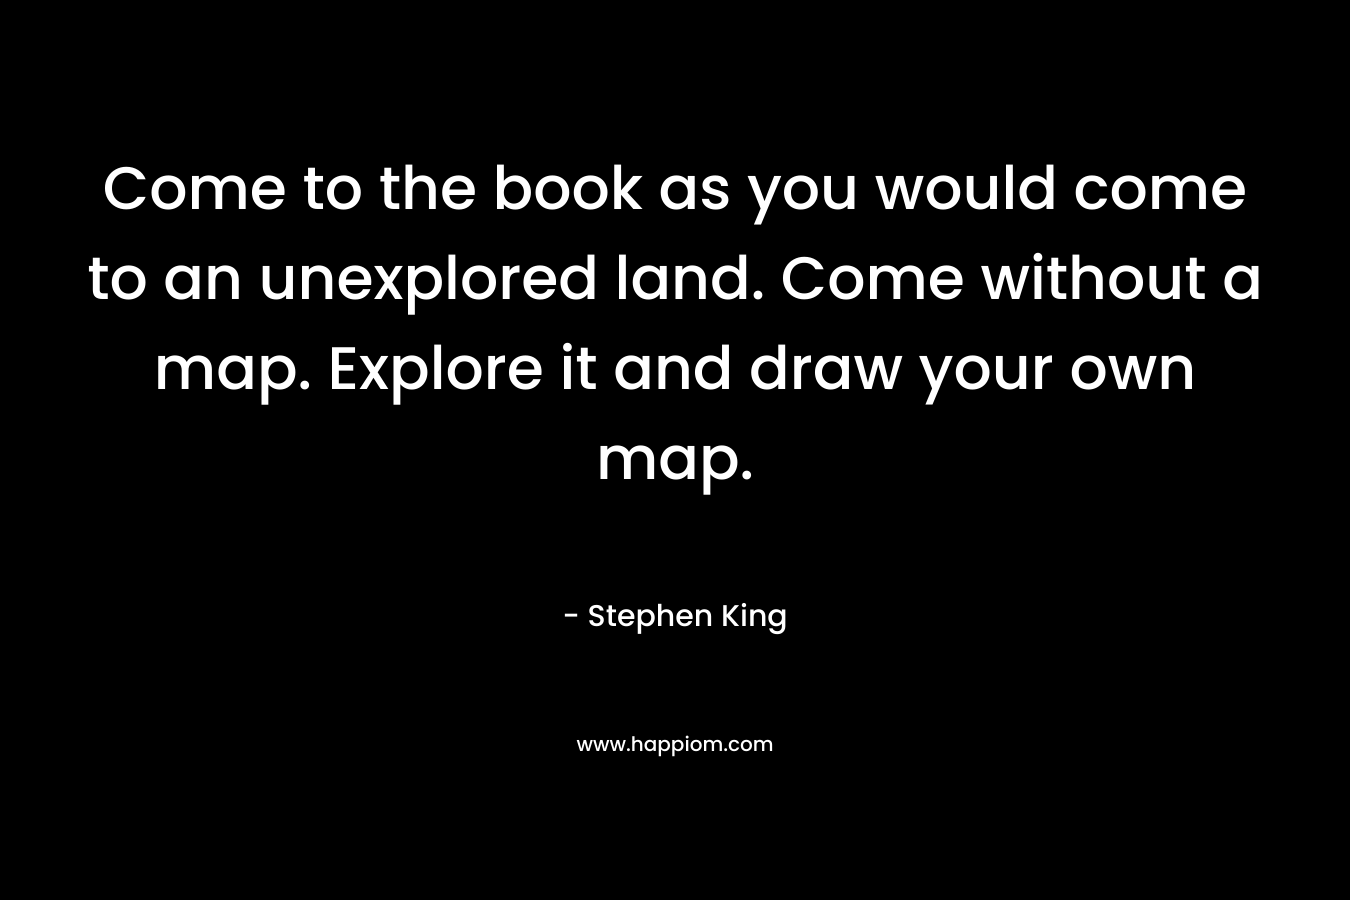 Come to the book as you would come to an unexplored land. Come without a map. Explore it and draw your own map. – Stephen King